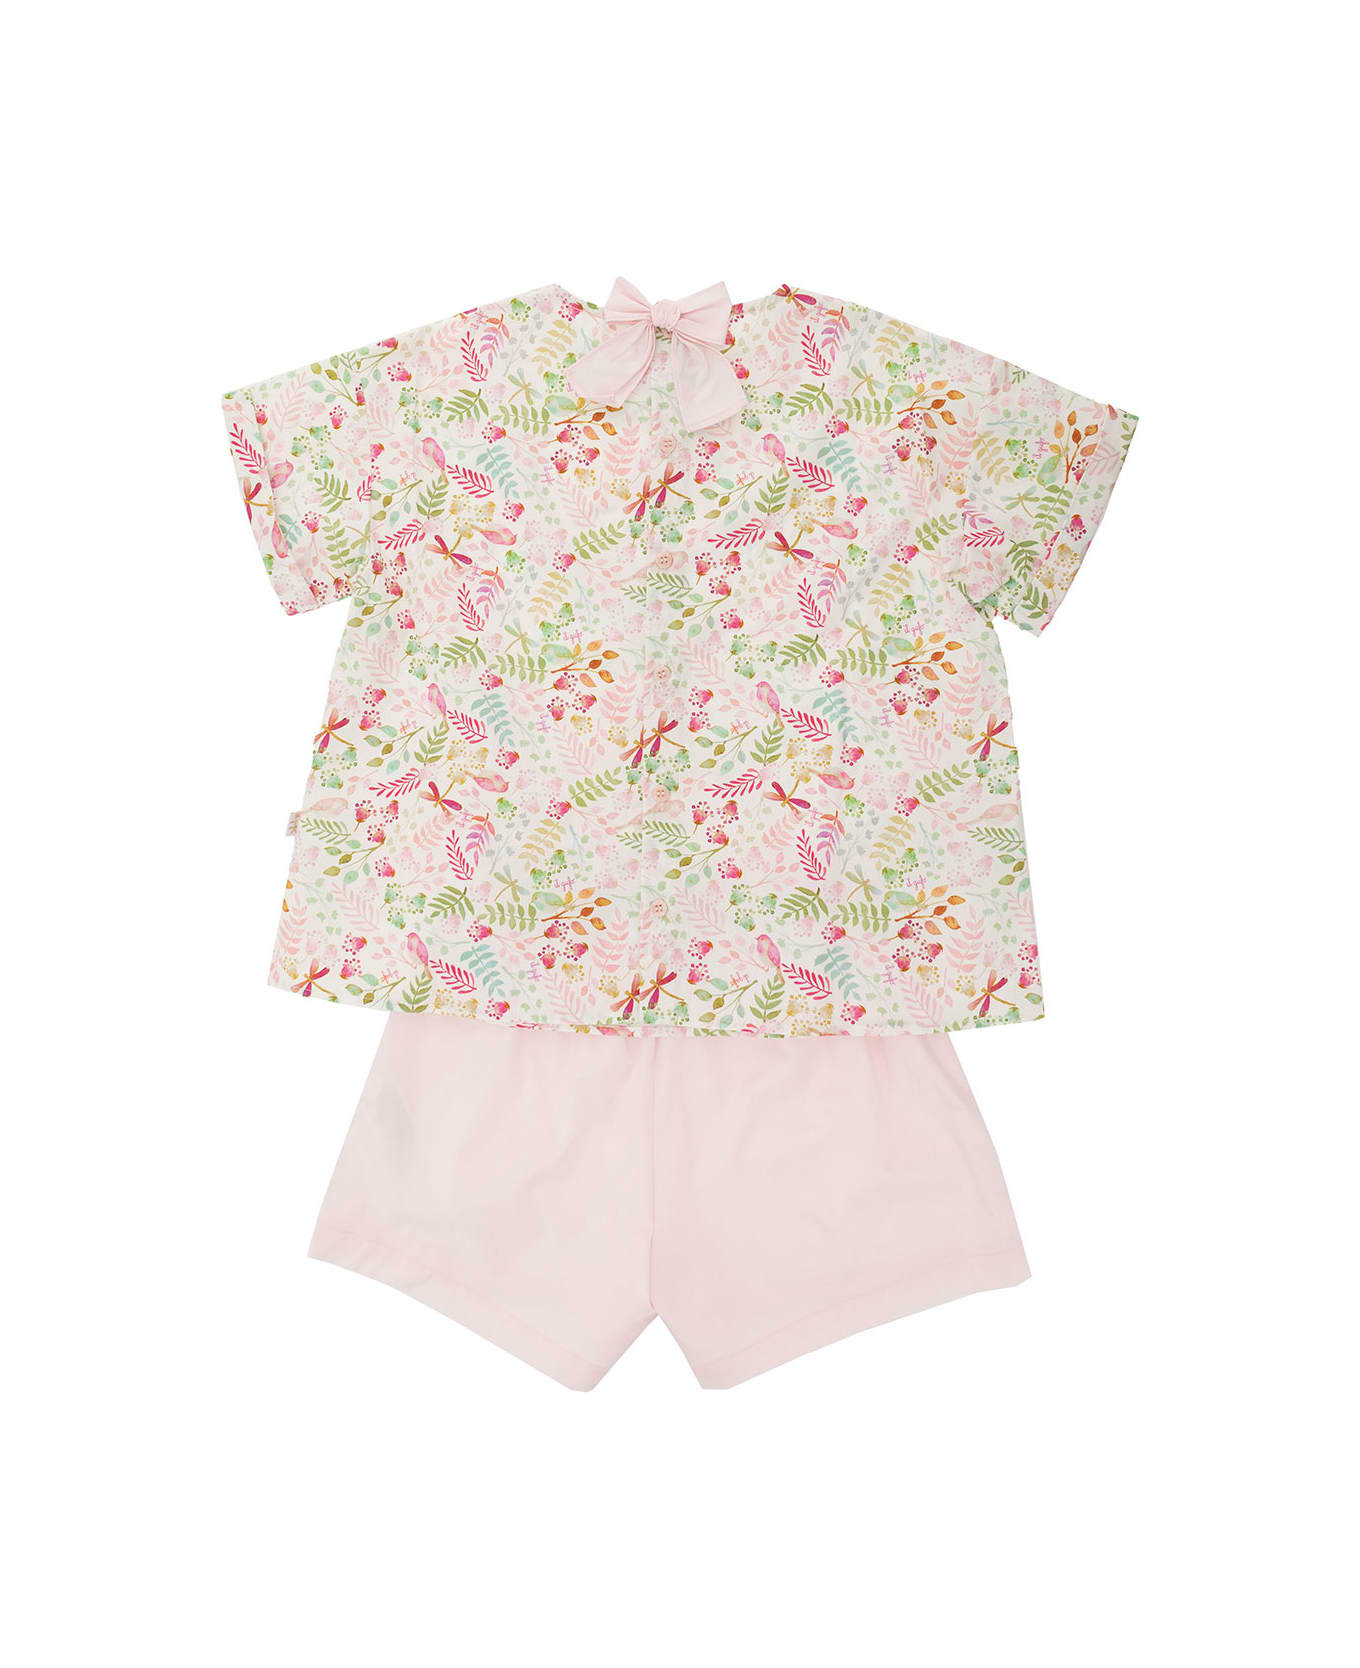 Il Gufo Pink T-shirt And Shorts With Flower Print And Bow Detail In Cotton Girl - Pink ジャンプスーツ